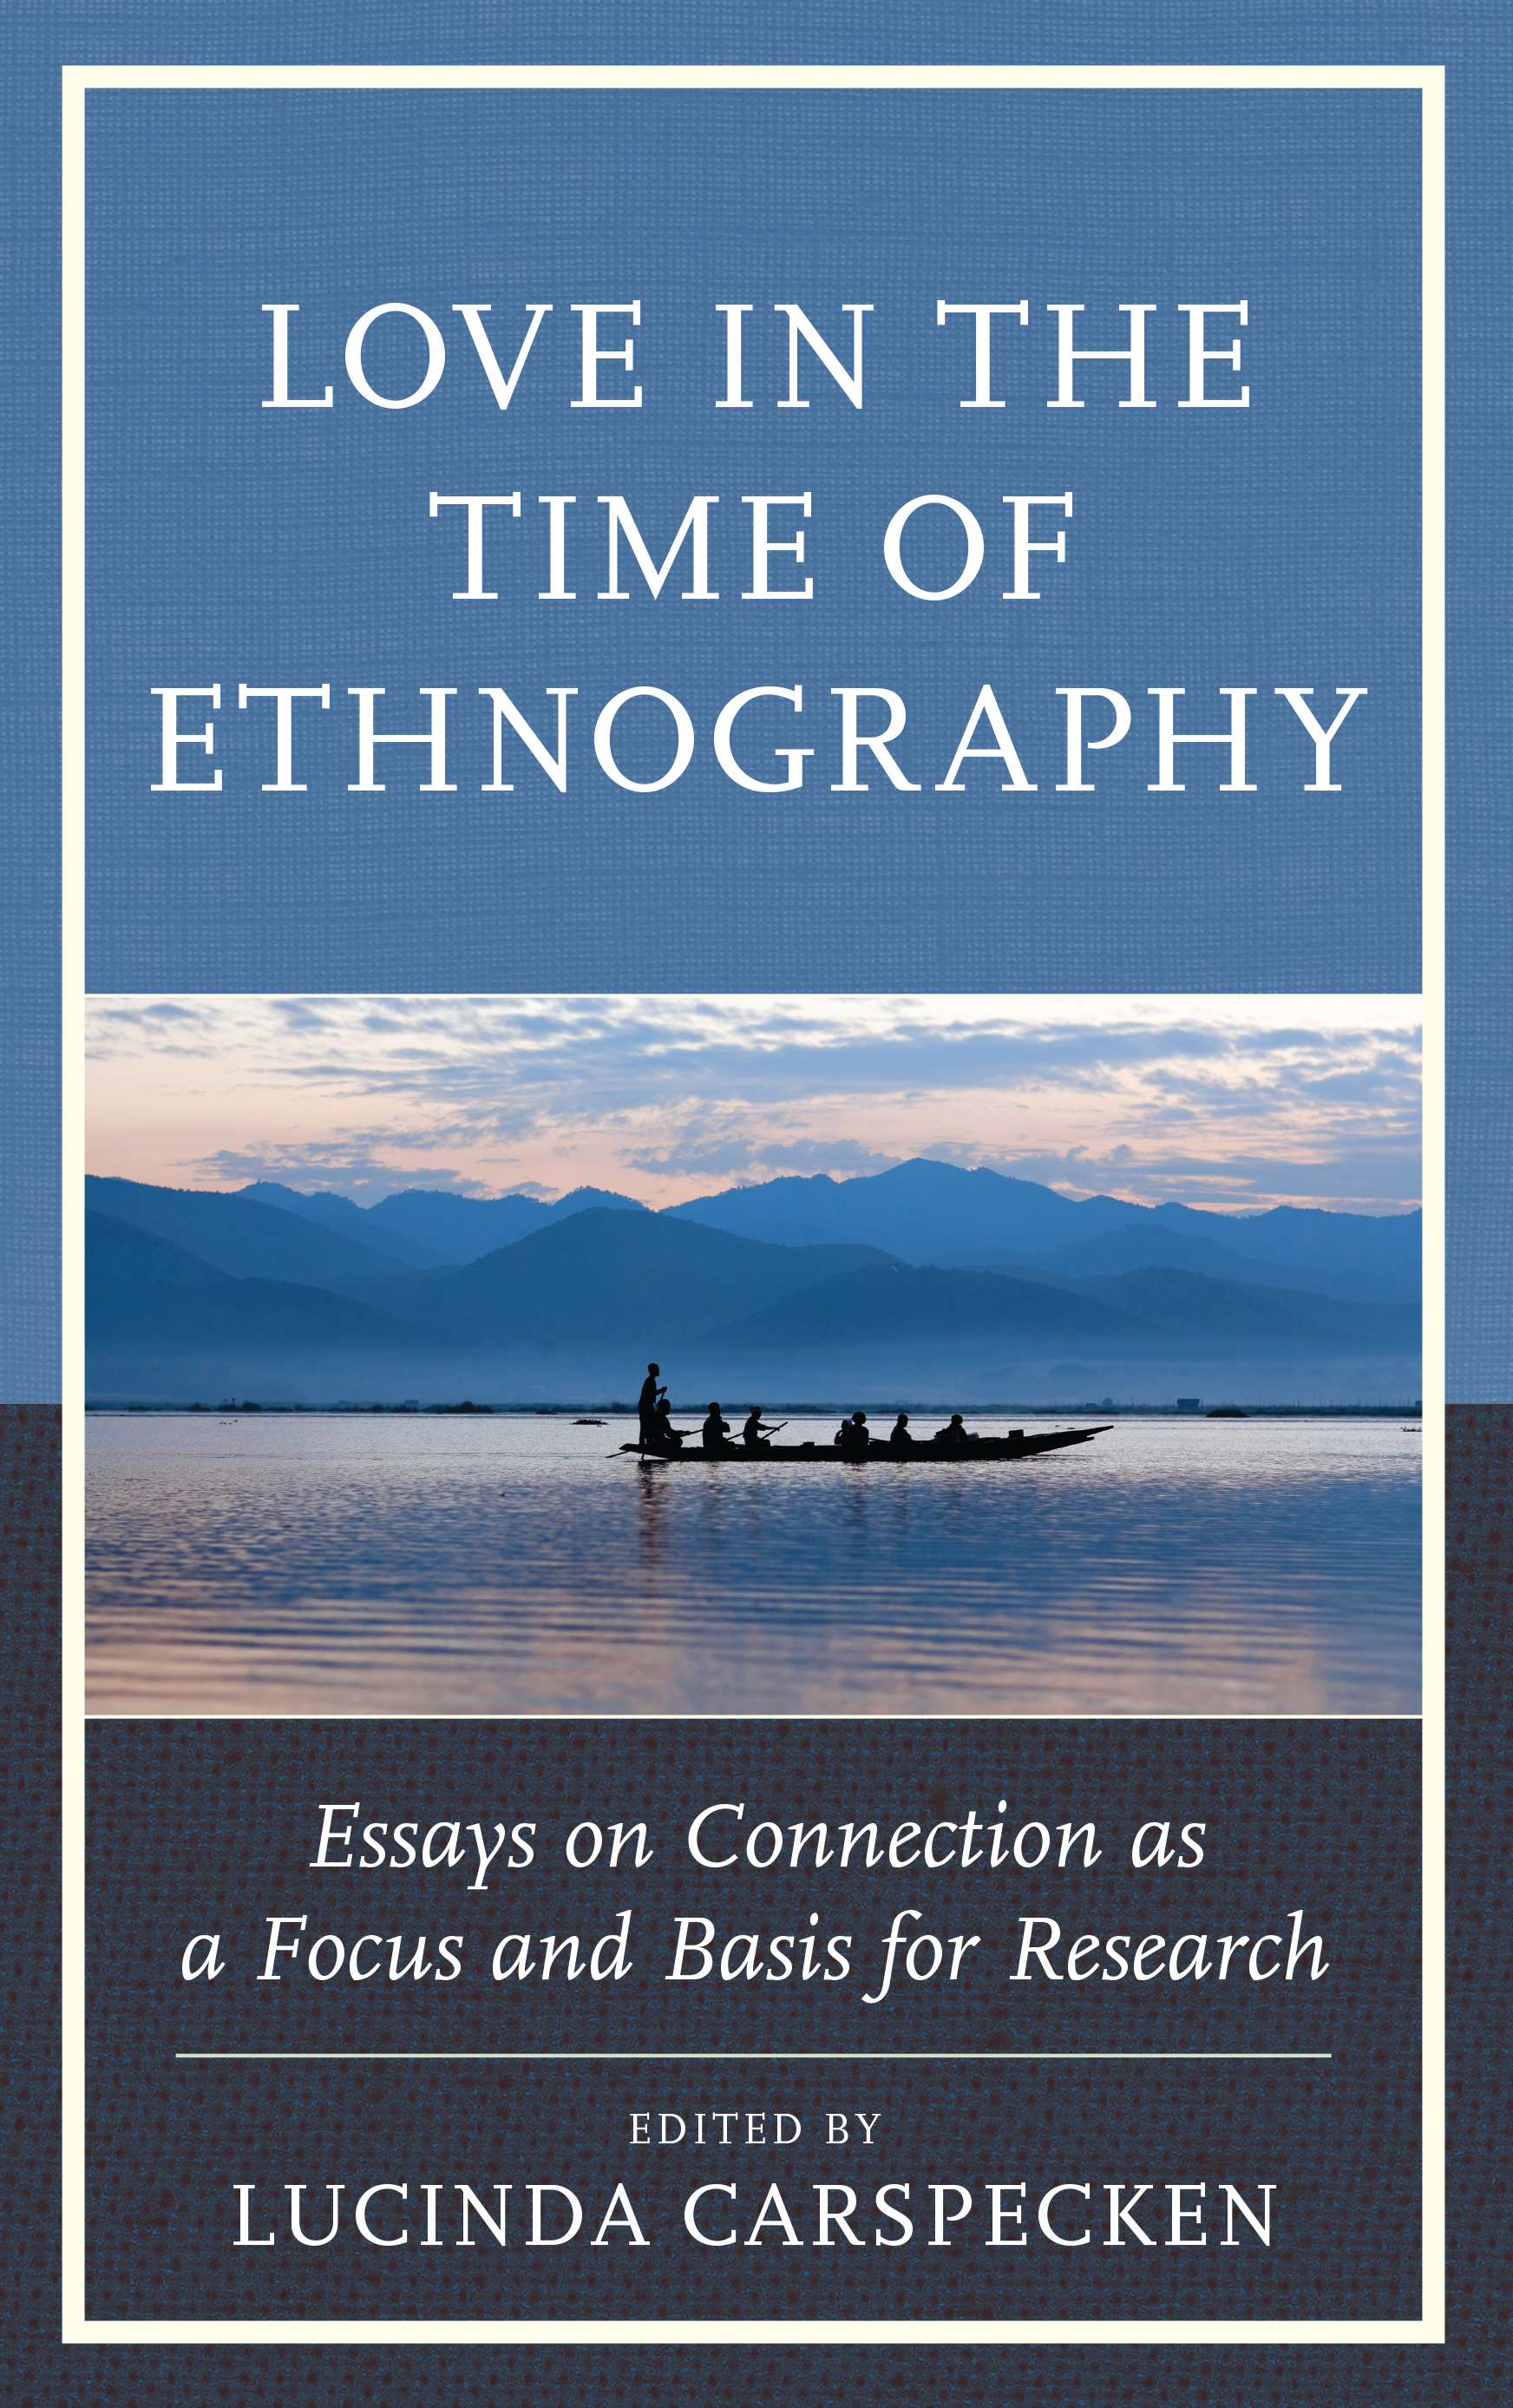 Love in the Time of Ethnography